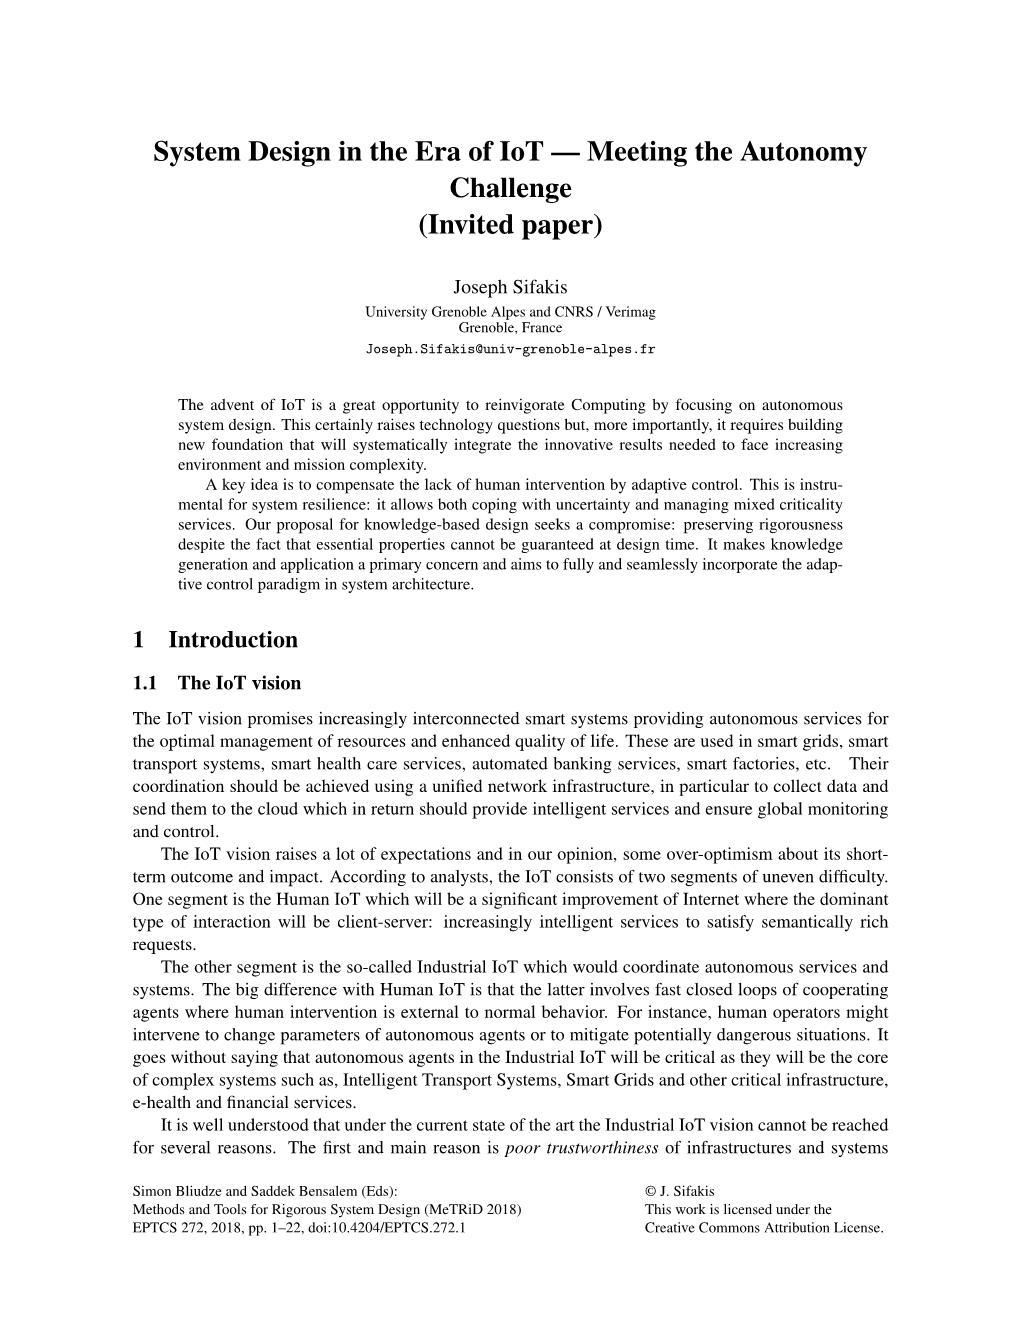 System Design in the Era of Iot — Meeting the Autonomy Challenge (Invited Paper)